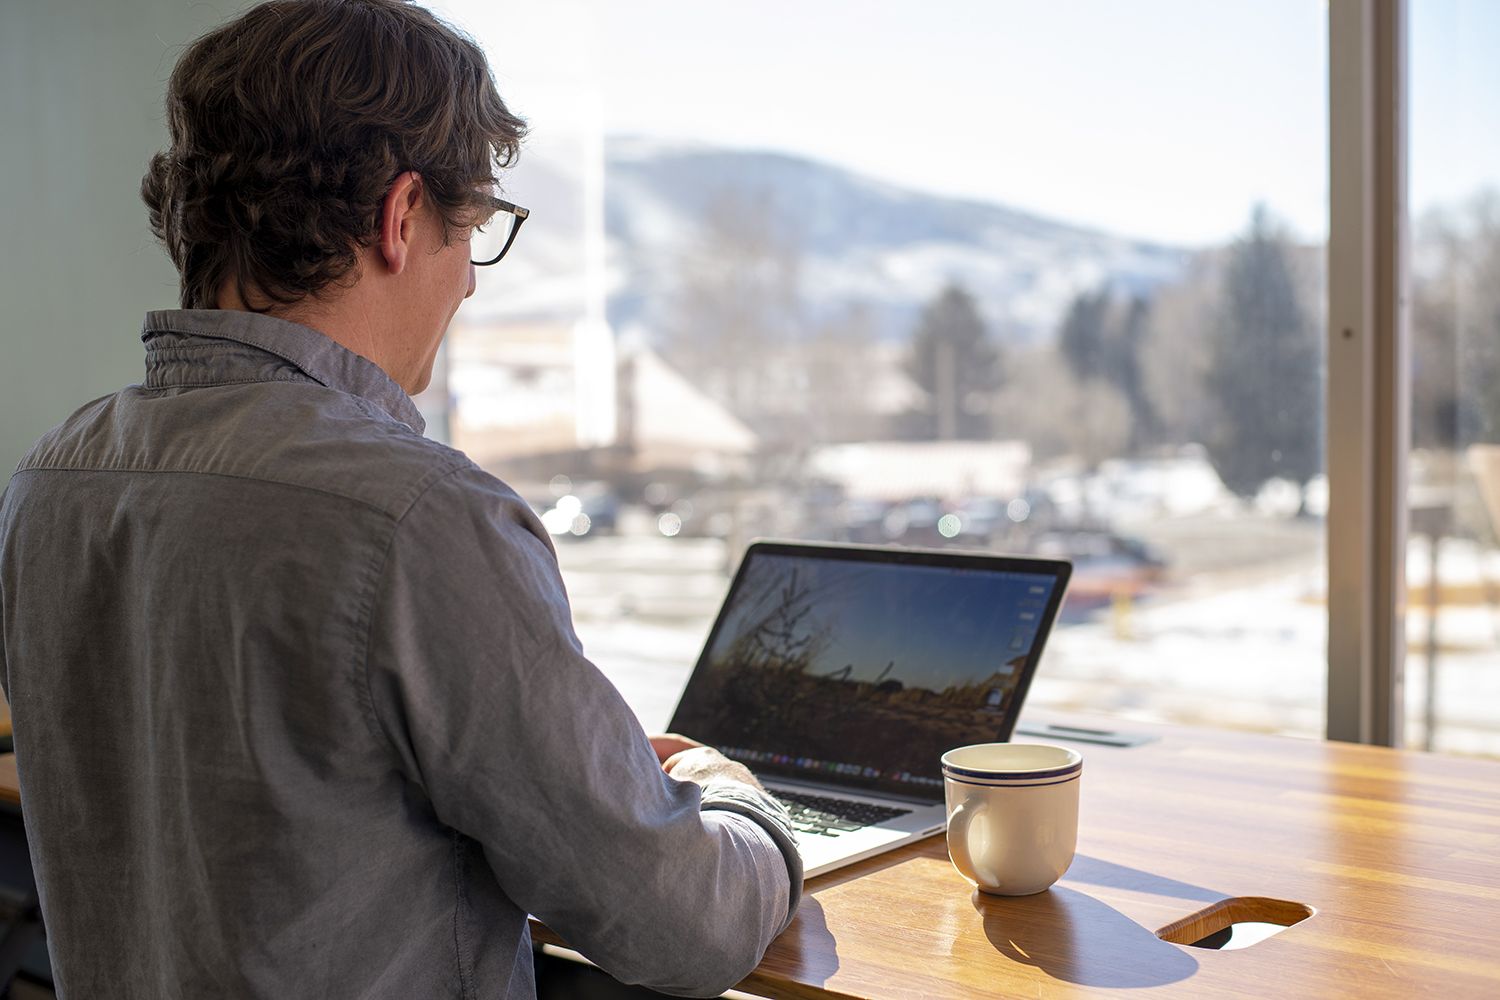 A man works at his computer at a sunny window with mountains outside.